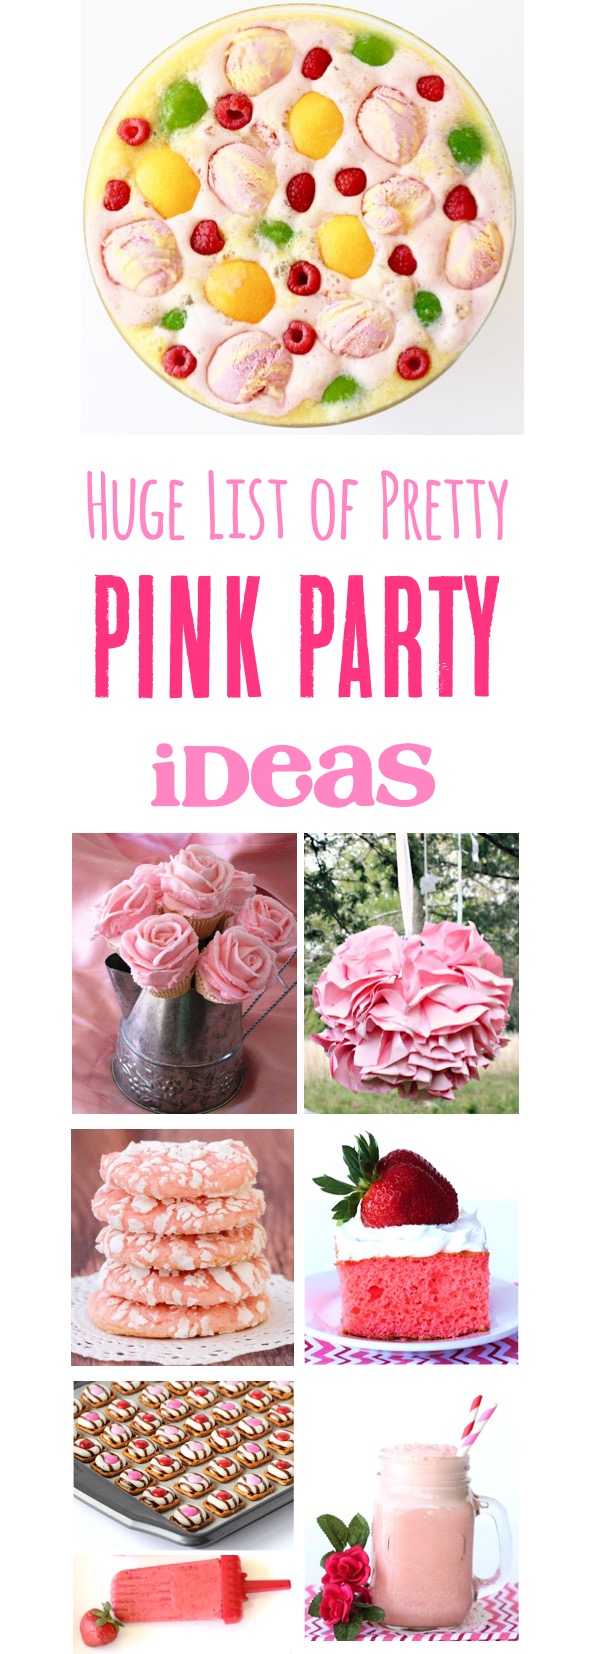 Pink Party Ideas - at TheFrugalGirls.com